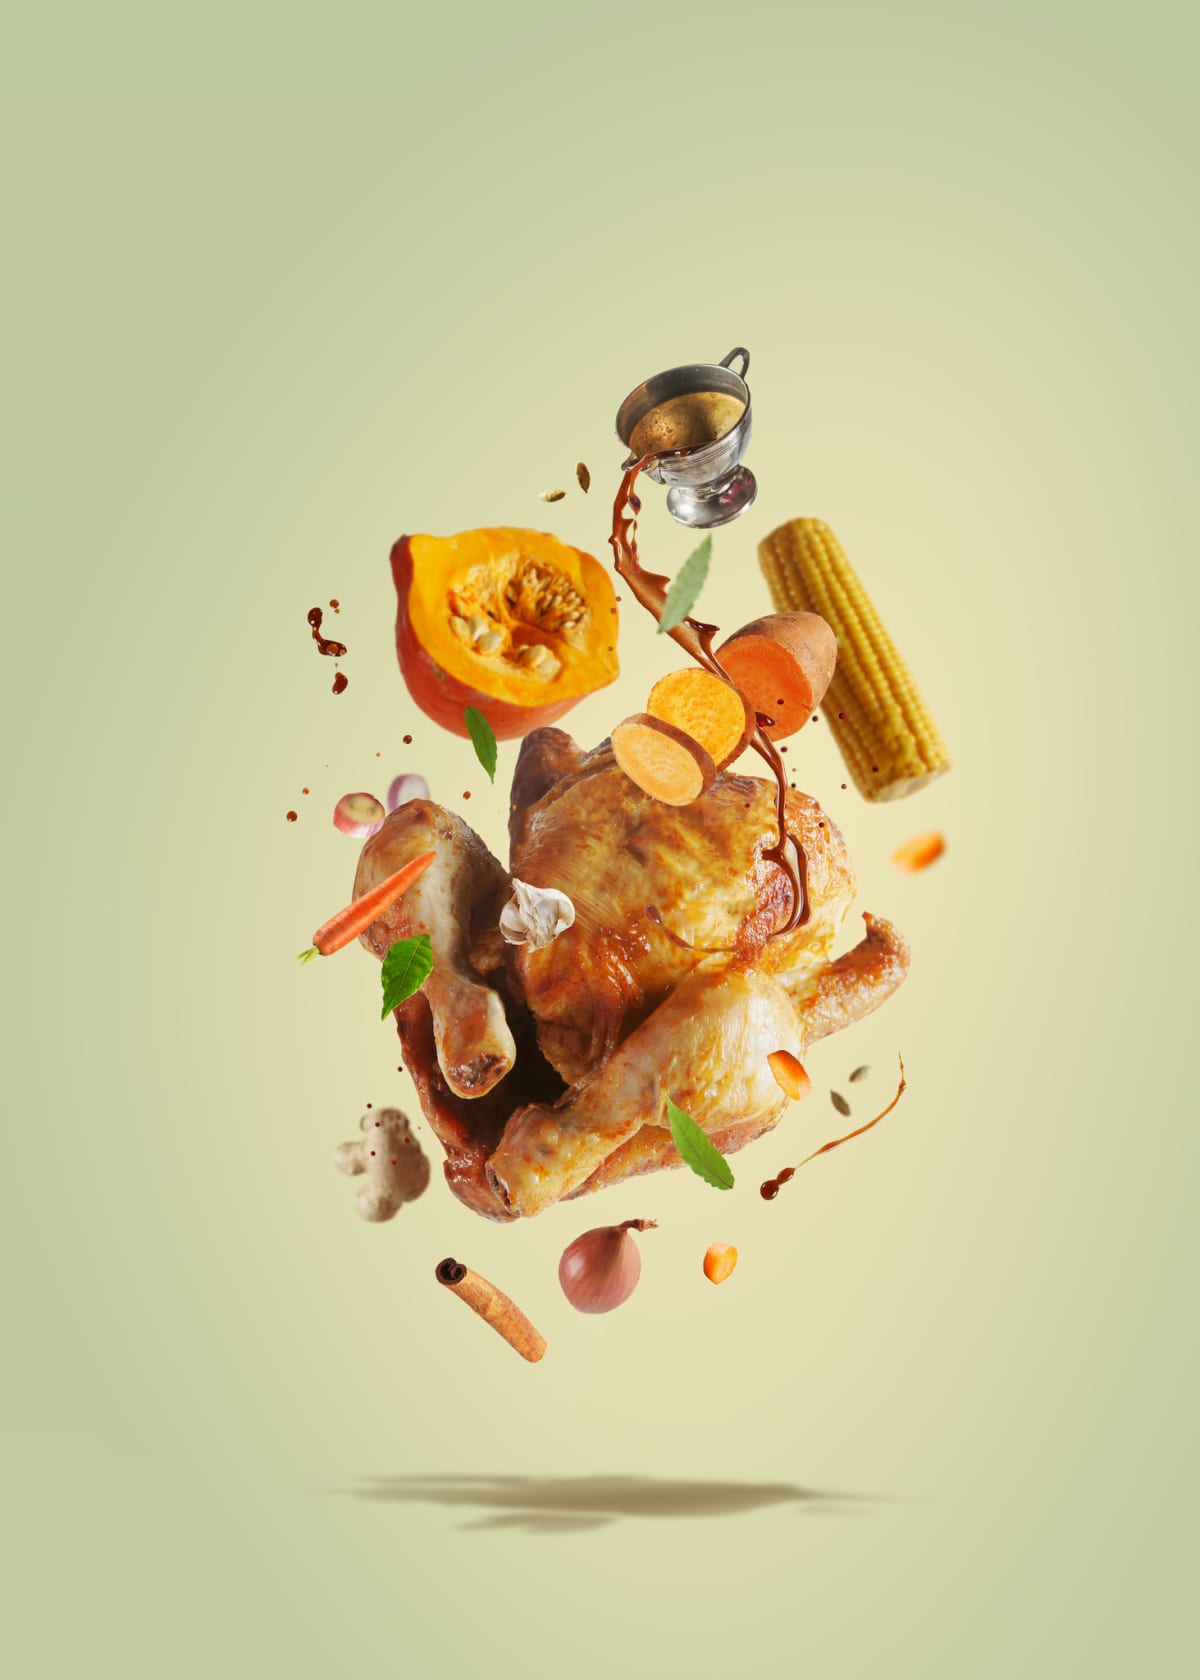 Creative Thanksgiving food with pouring sauce on flying roasted whole turkey, pumpkin, sweet potato, corn and carrots flying in the air. Levitation food concept with traditional festive american dinner. Front view.